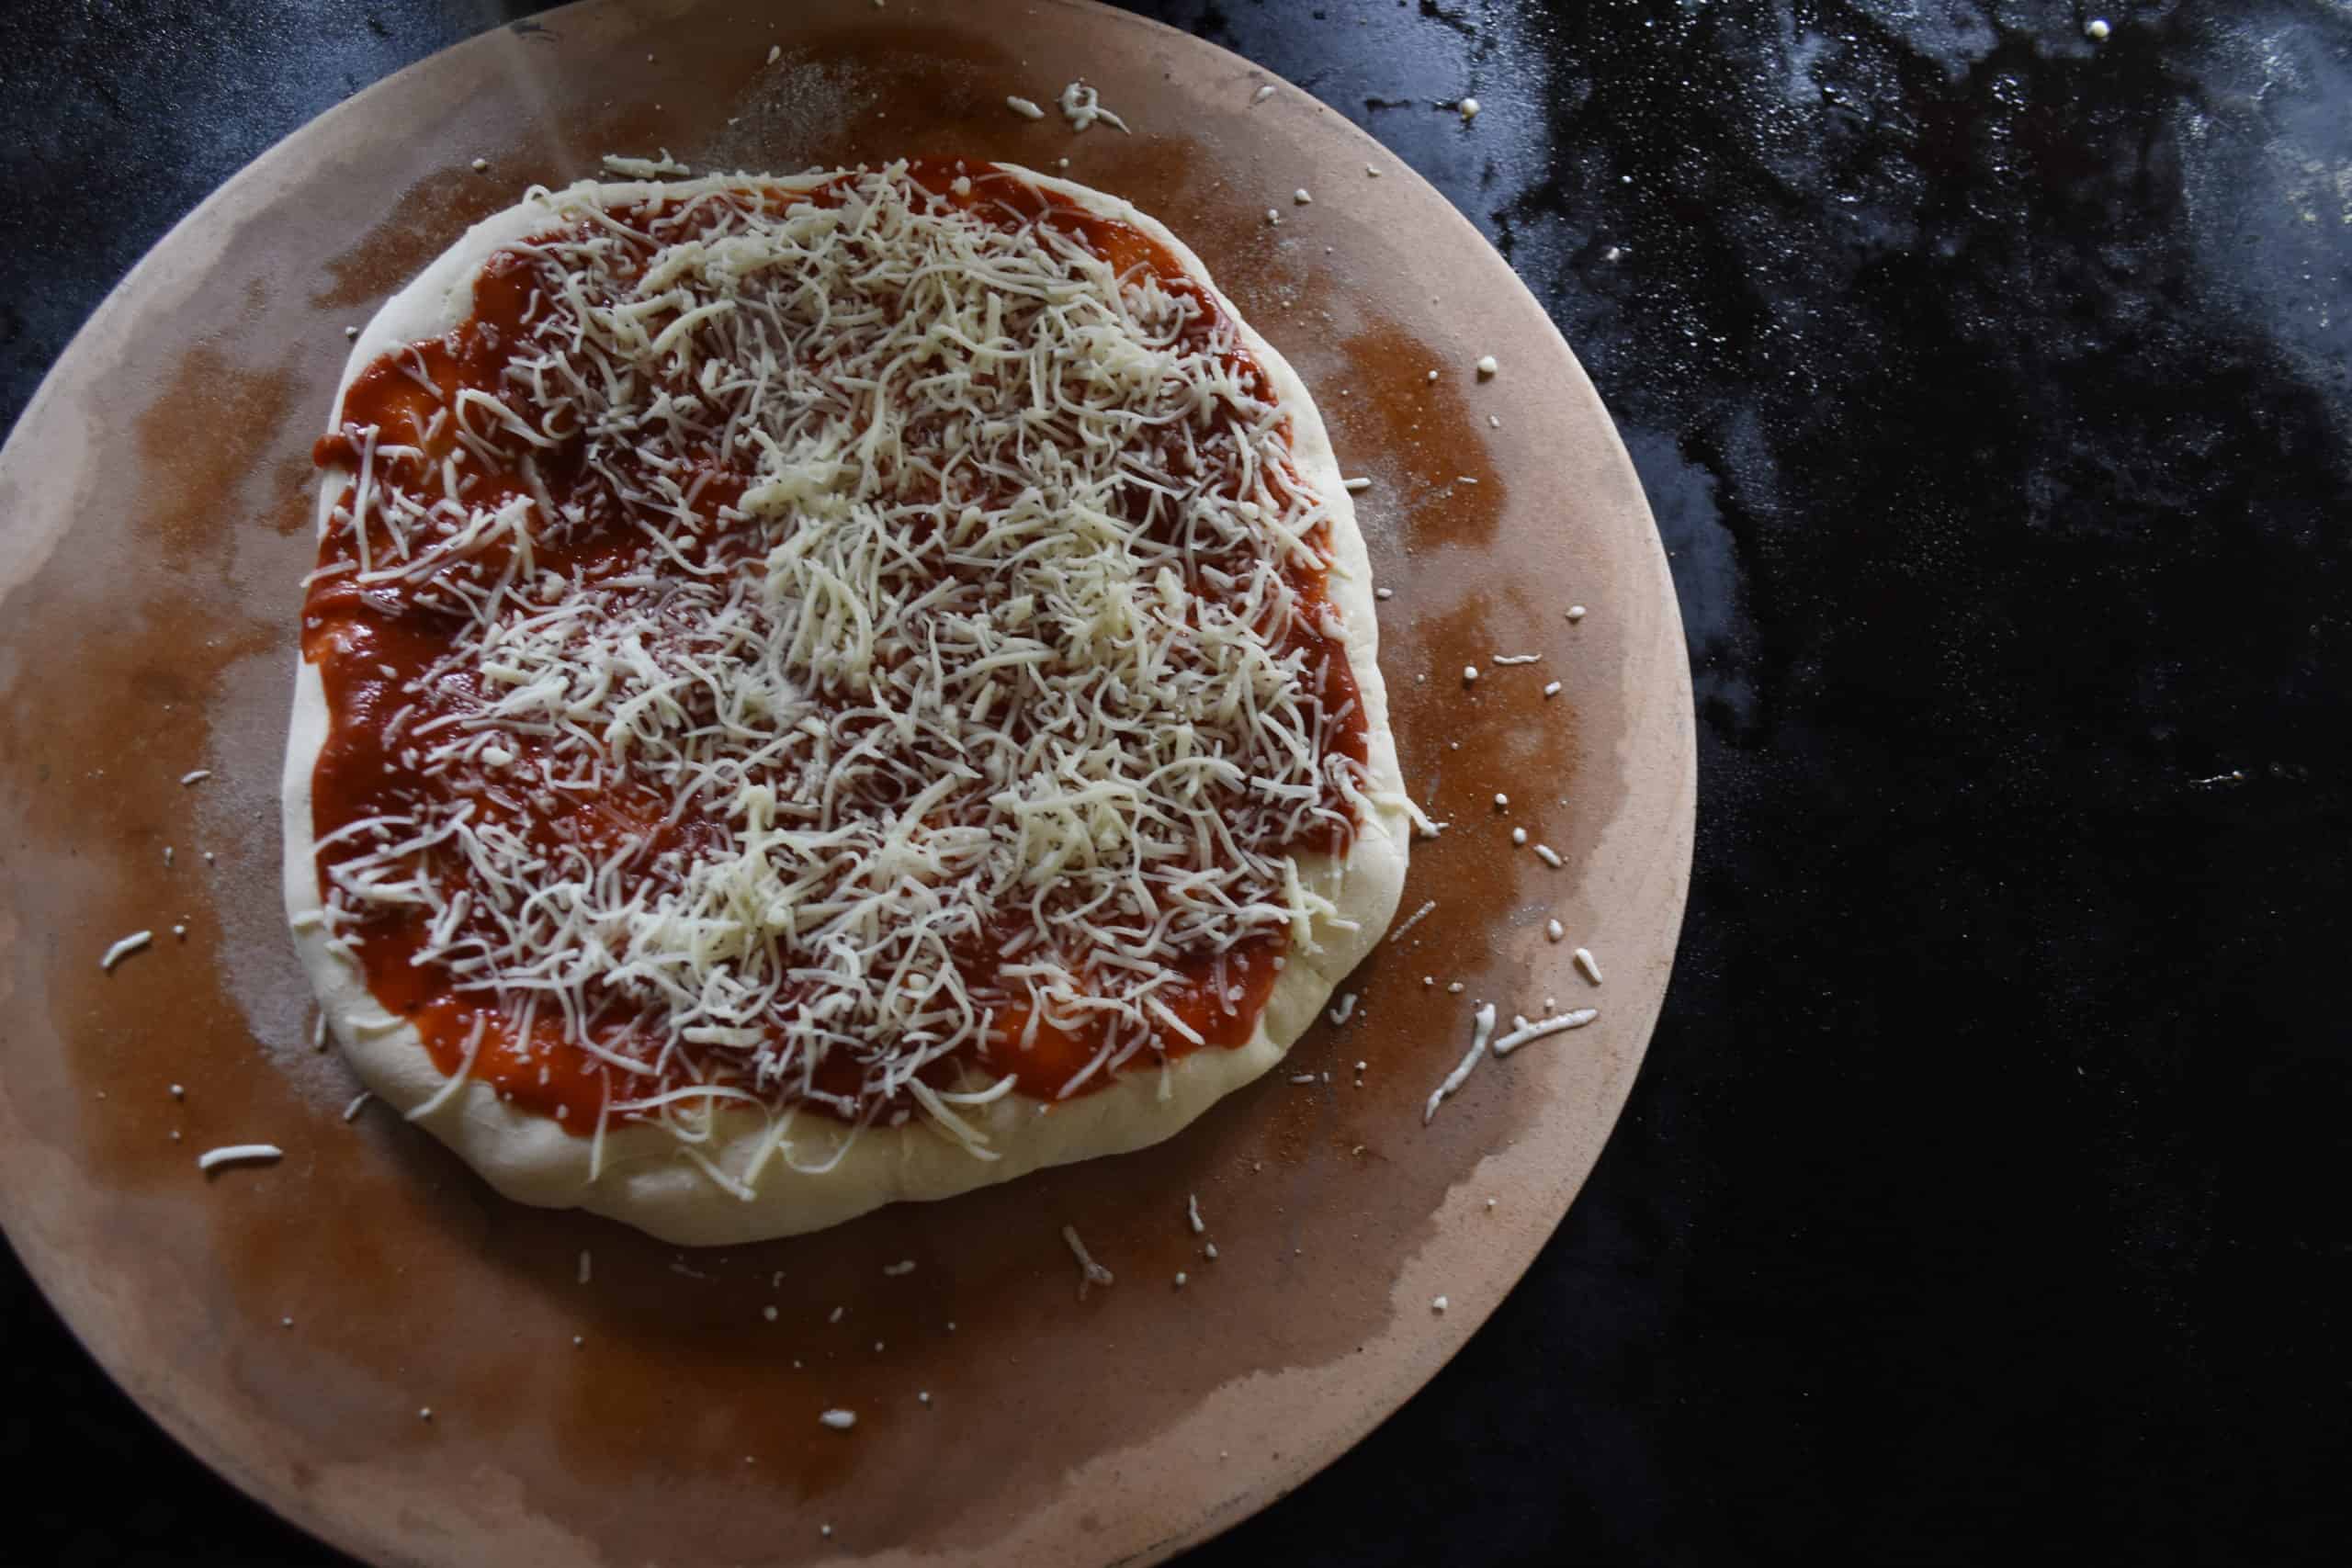 Sprinkle a thin layer of shredded cheese on top of the pizza sauce.